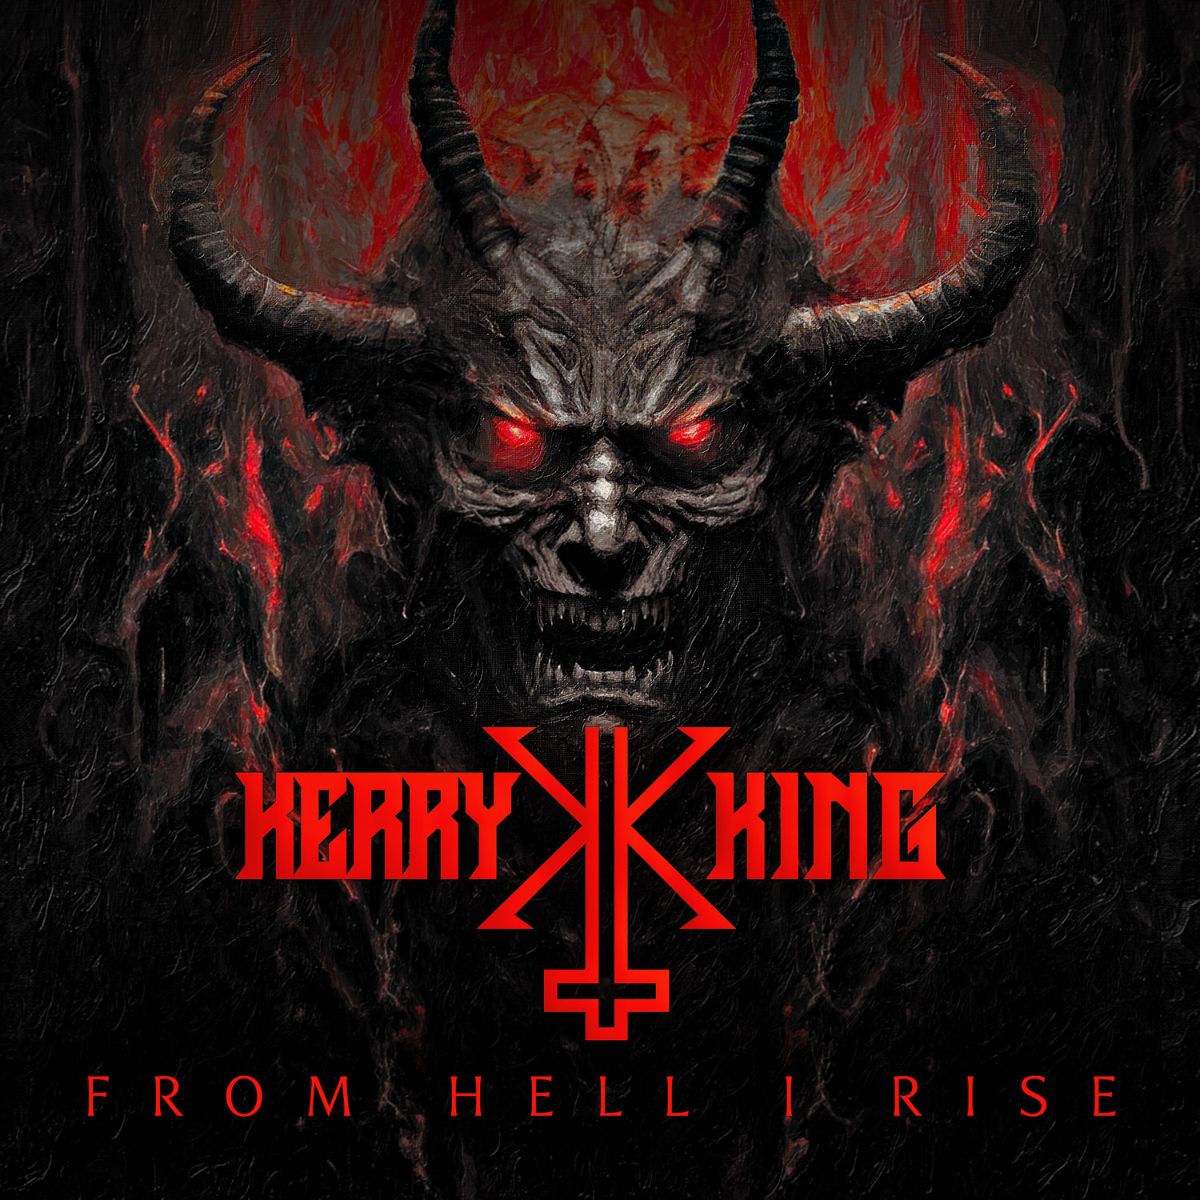 kerry king - from hell I rise